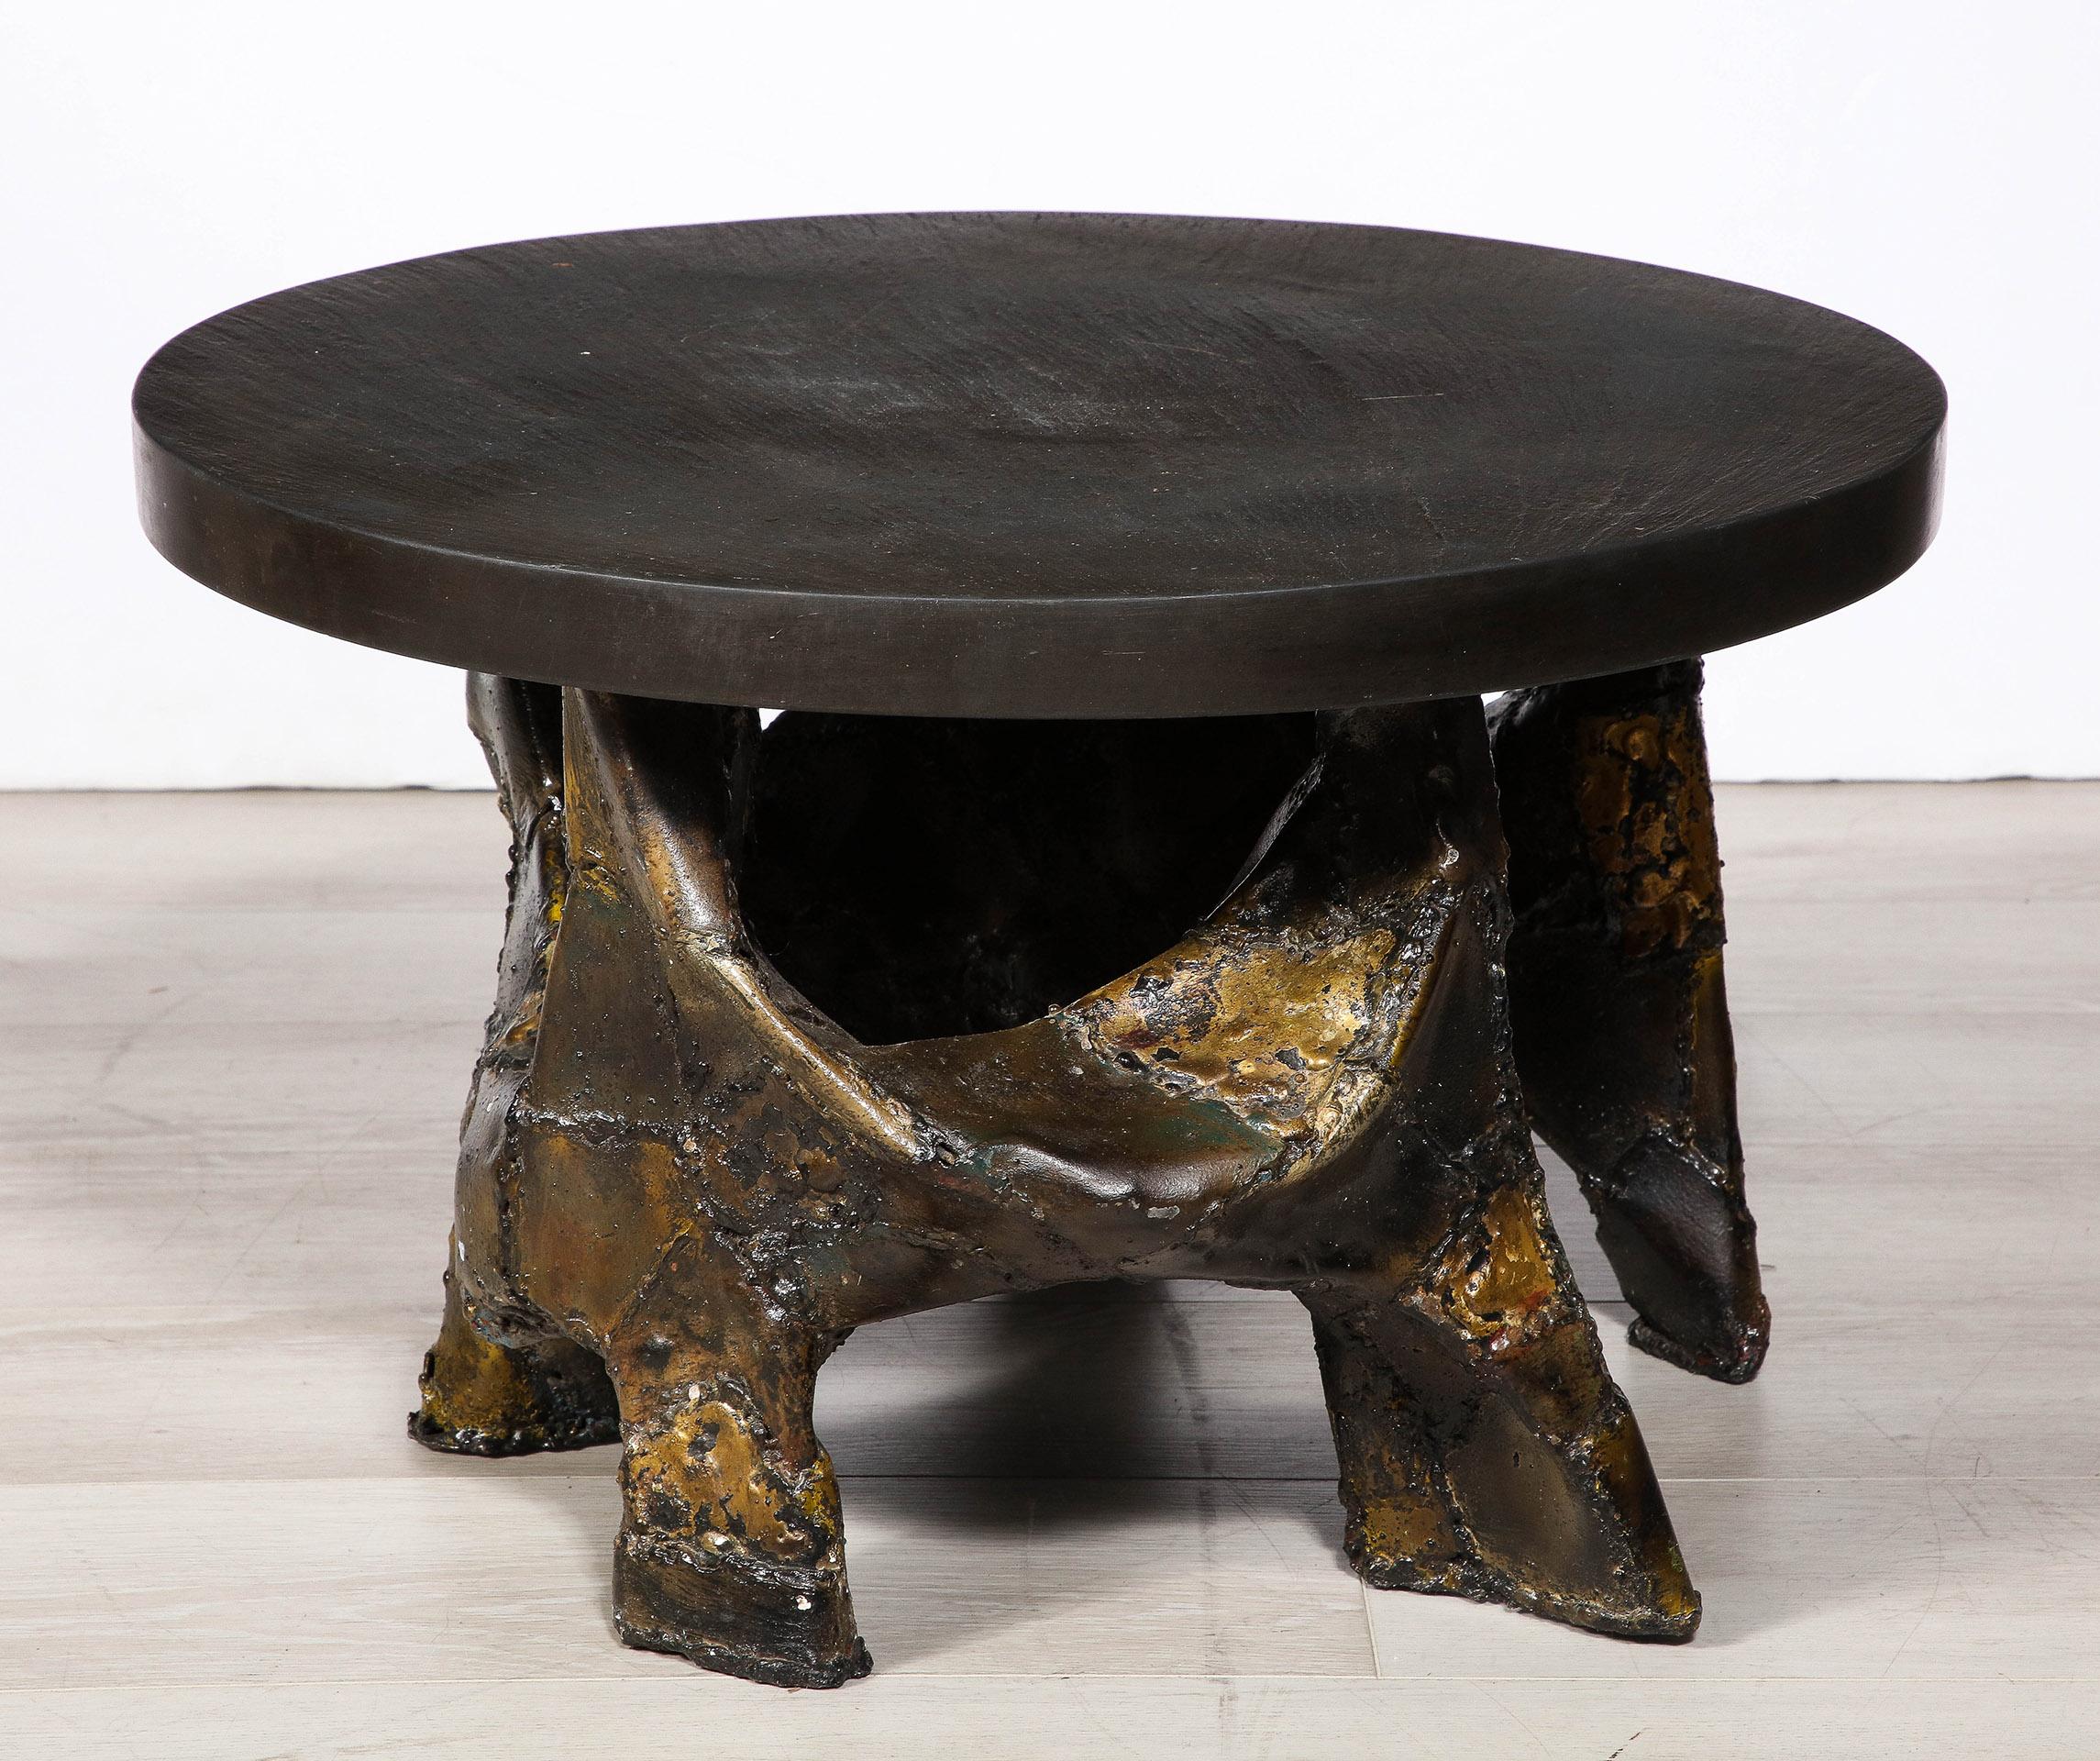 Patinated Patchwork Table by Paul Evans